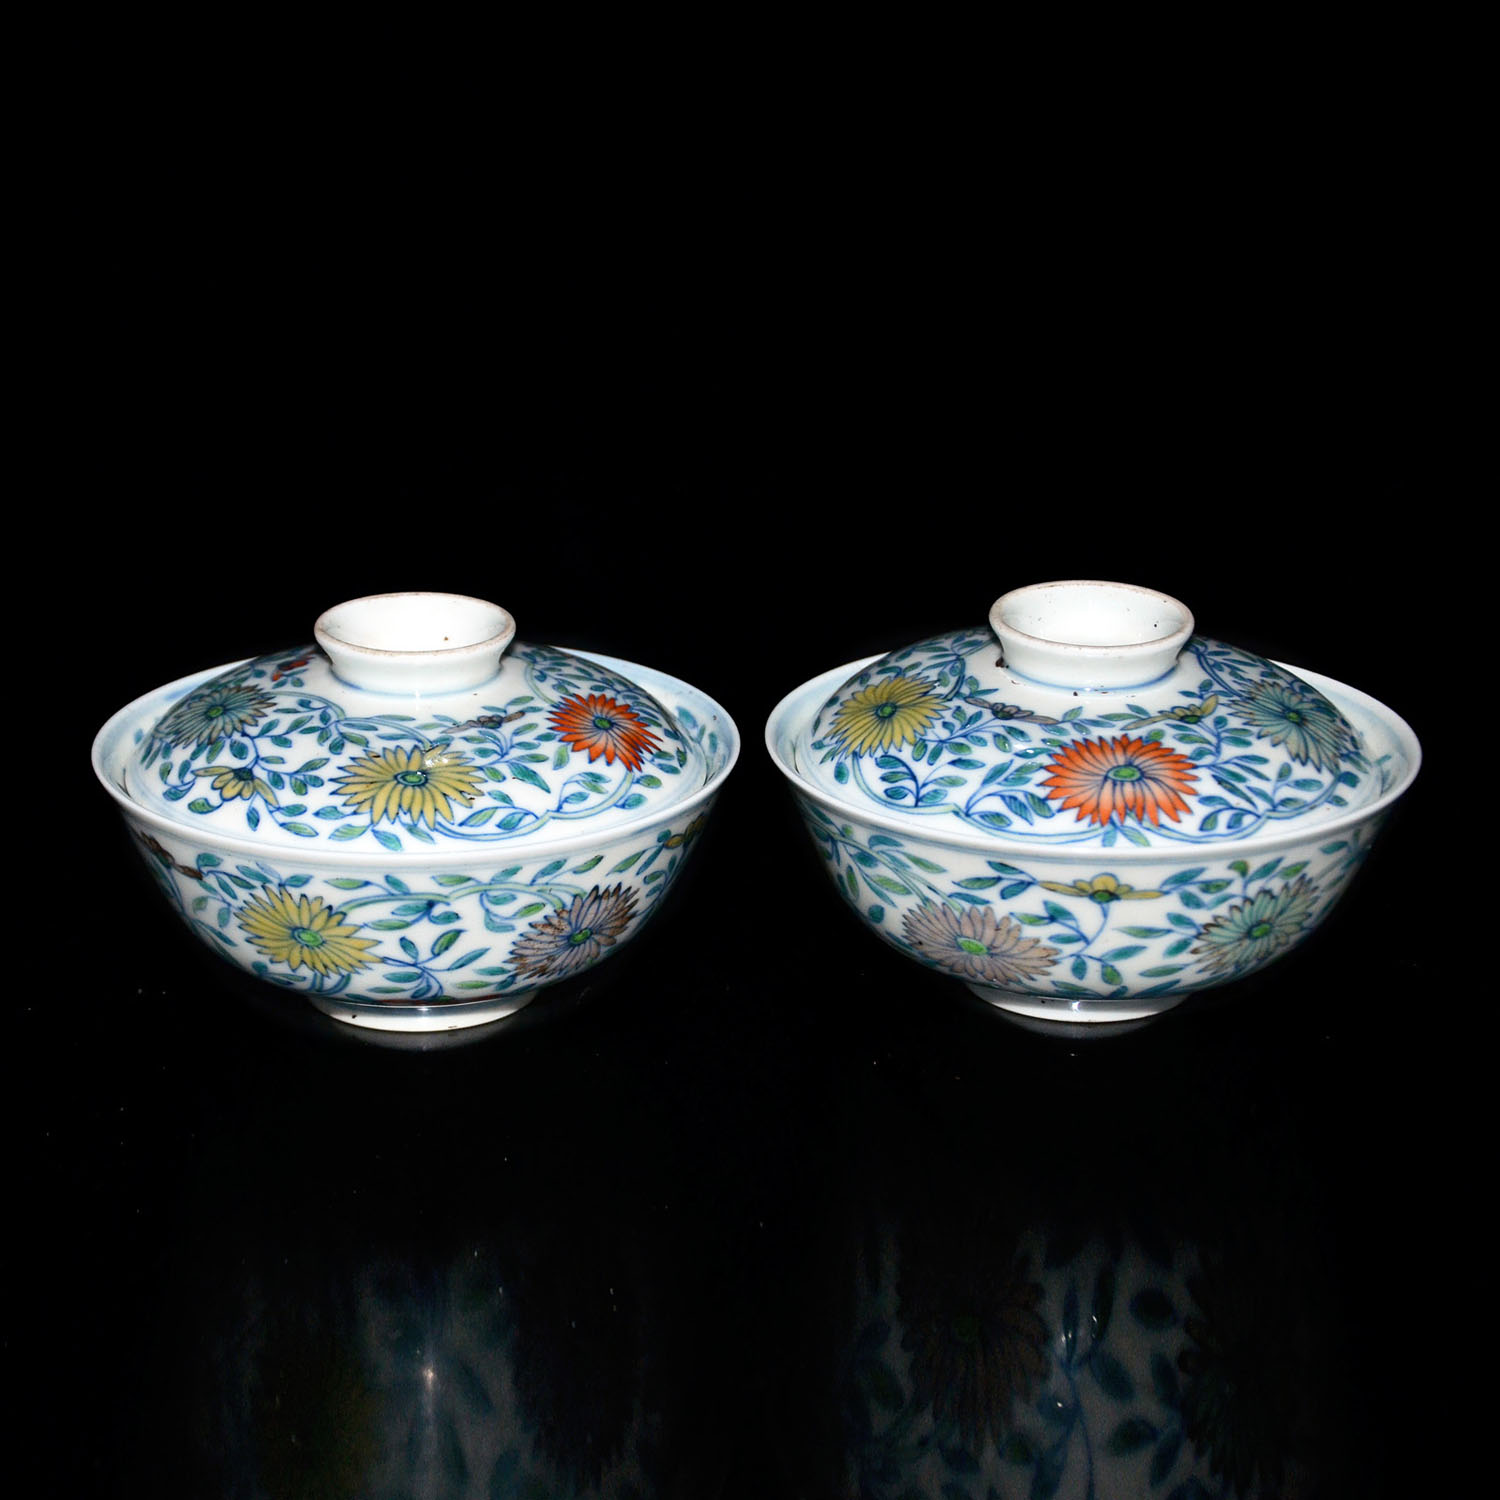 ???????????  A Pair of Doucai Chrysanthemum Tea Bowl with Cover ??????????? (??????)? A Pair of